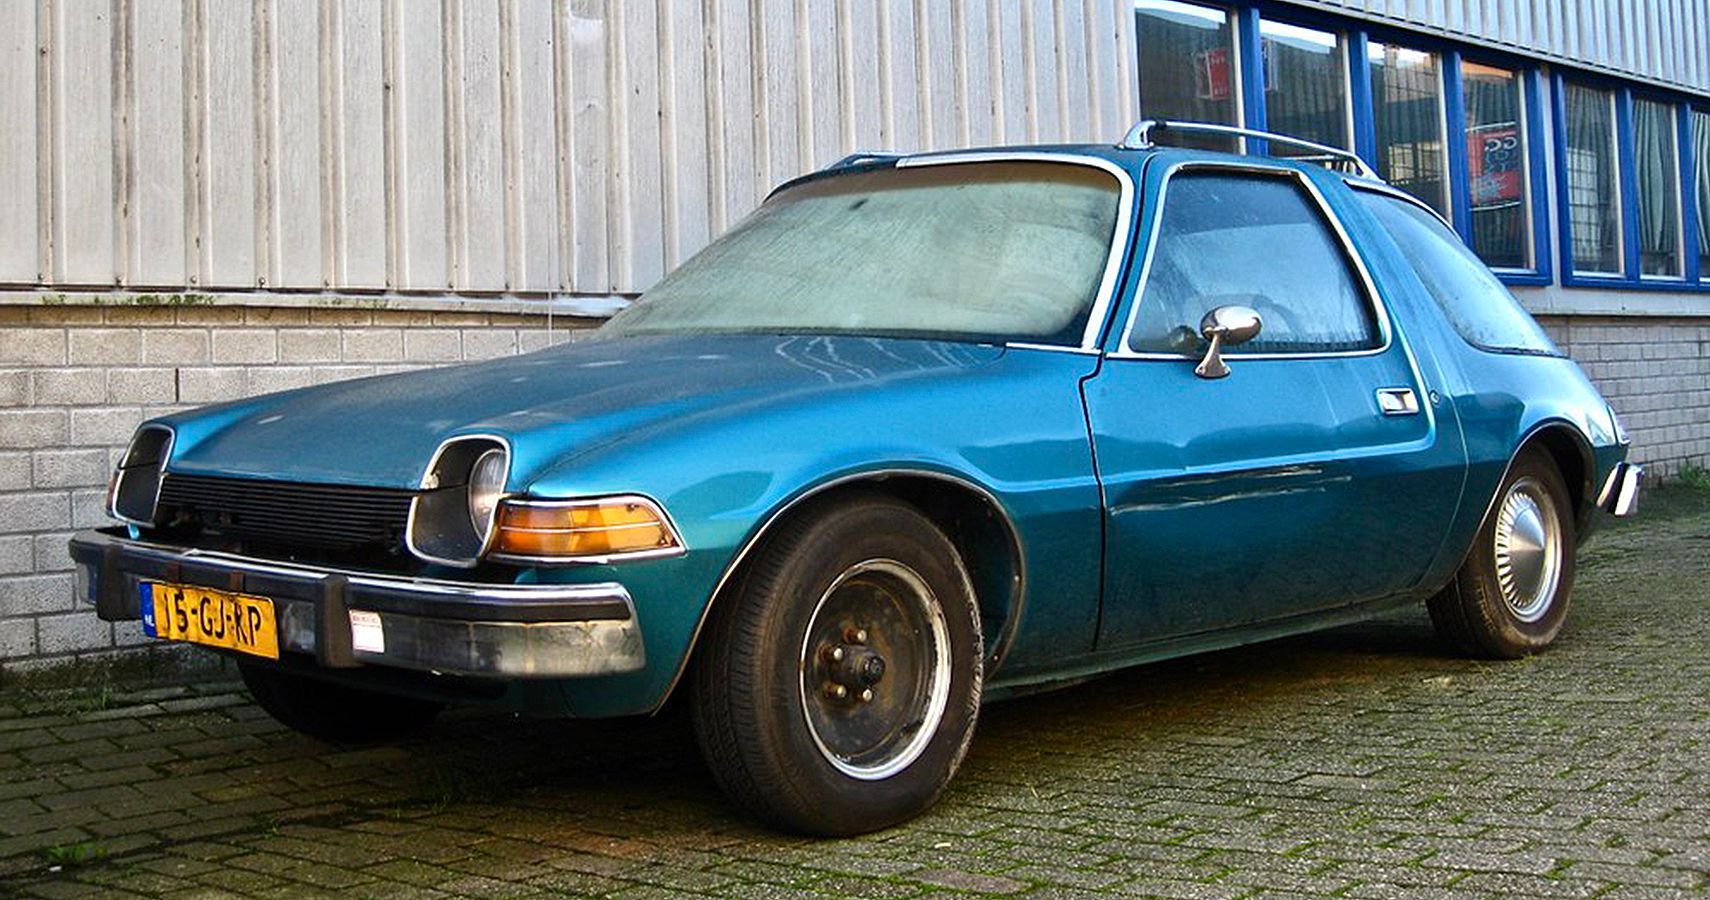 1975 AMC Pacer: The Fishbowl